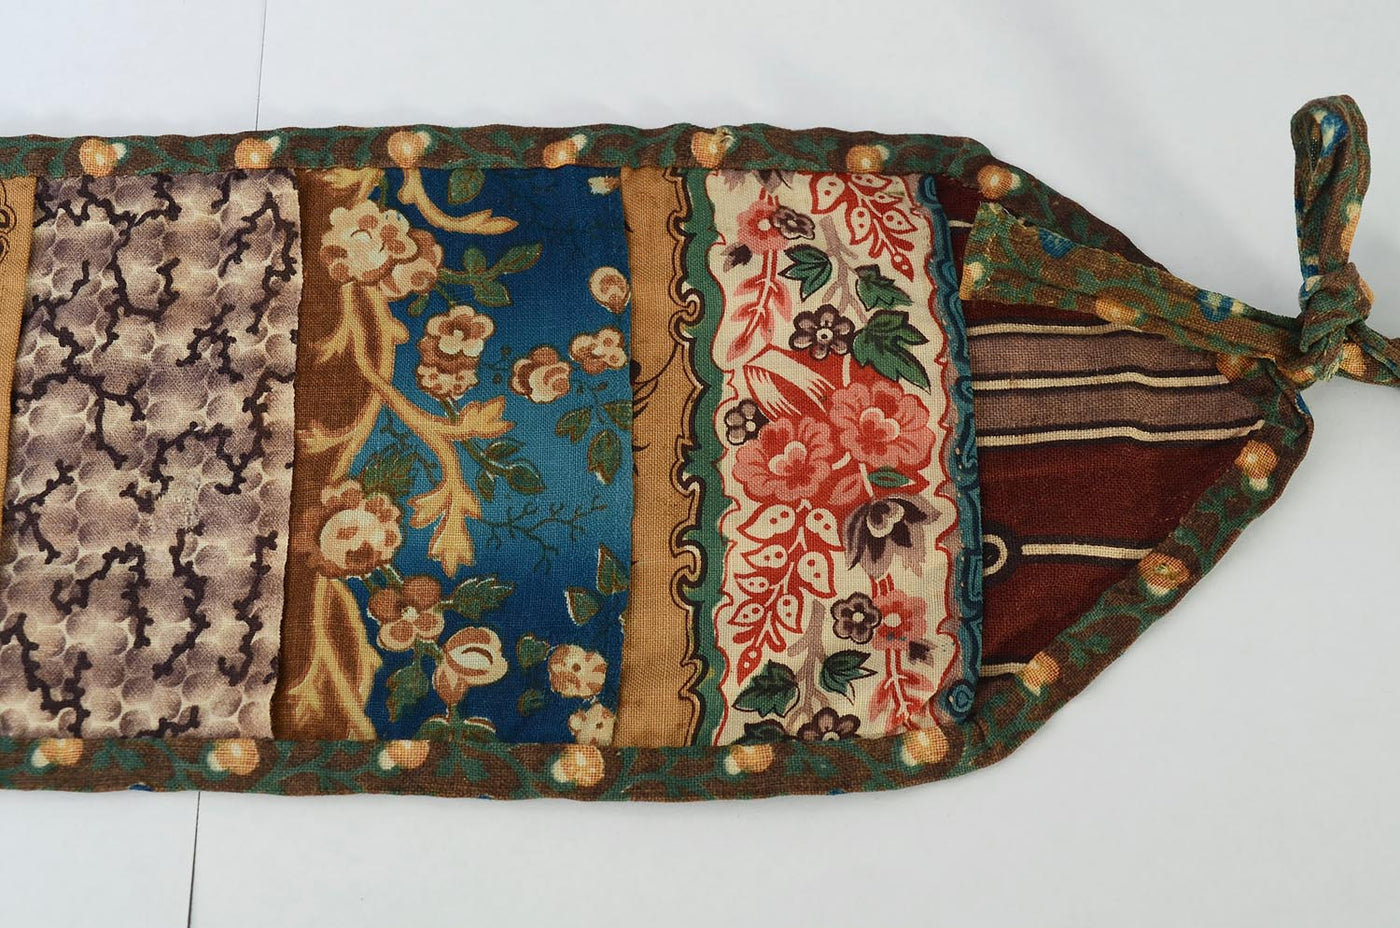 Sewing Roll Up Huswif; Connecticut; Circa 1850